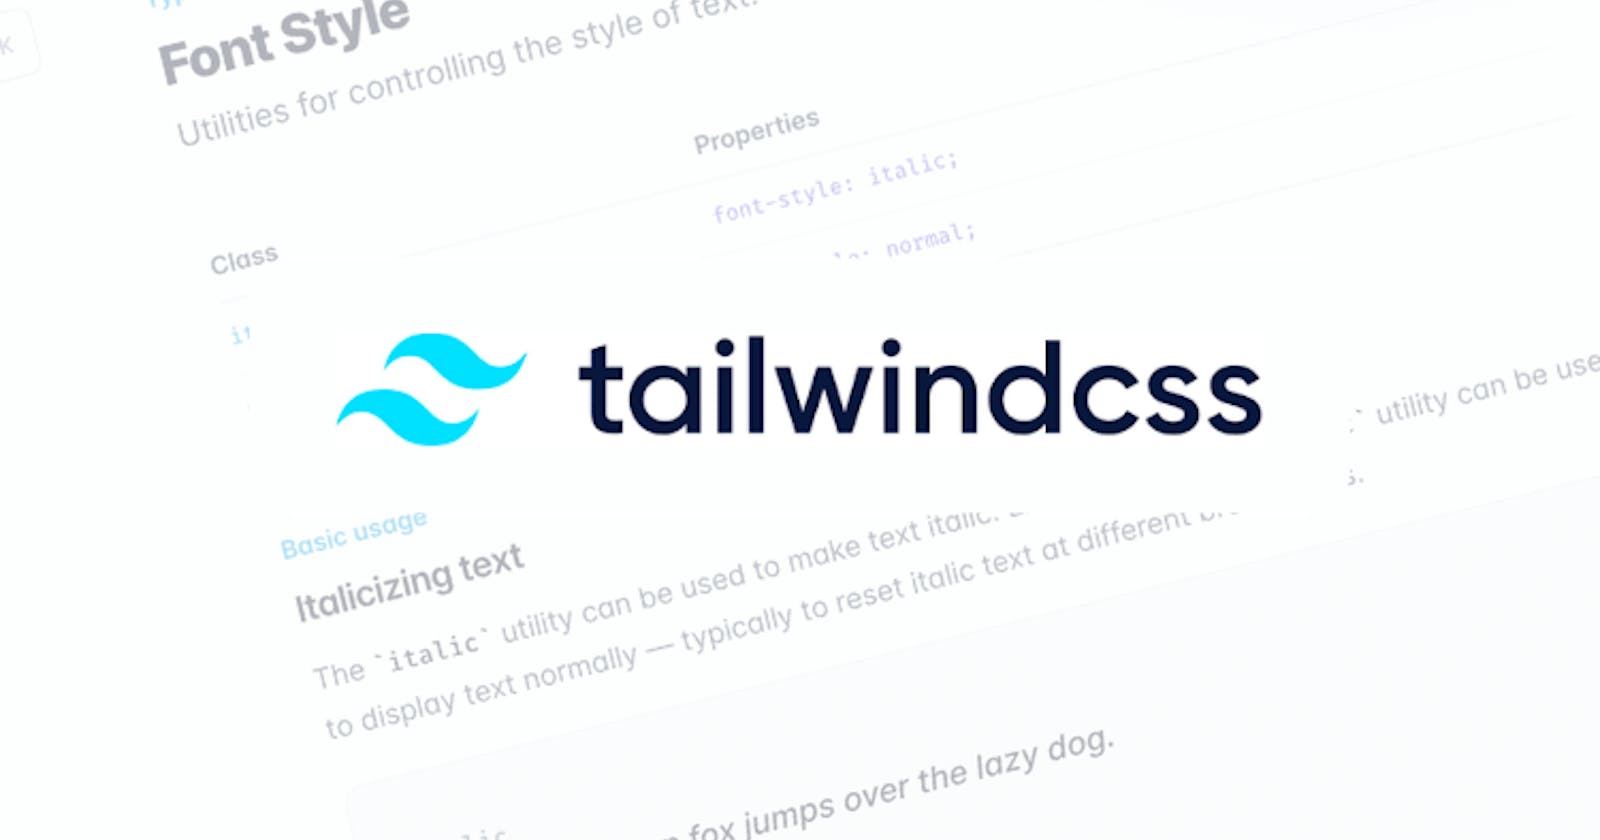 Font style & typography in Tailwindcss